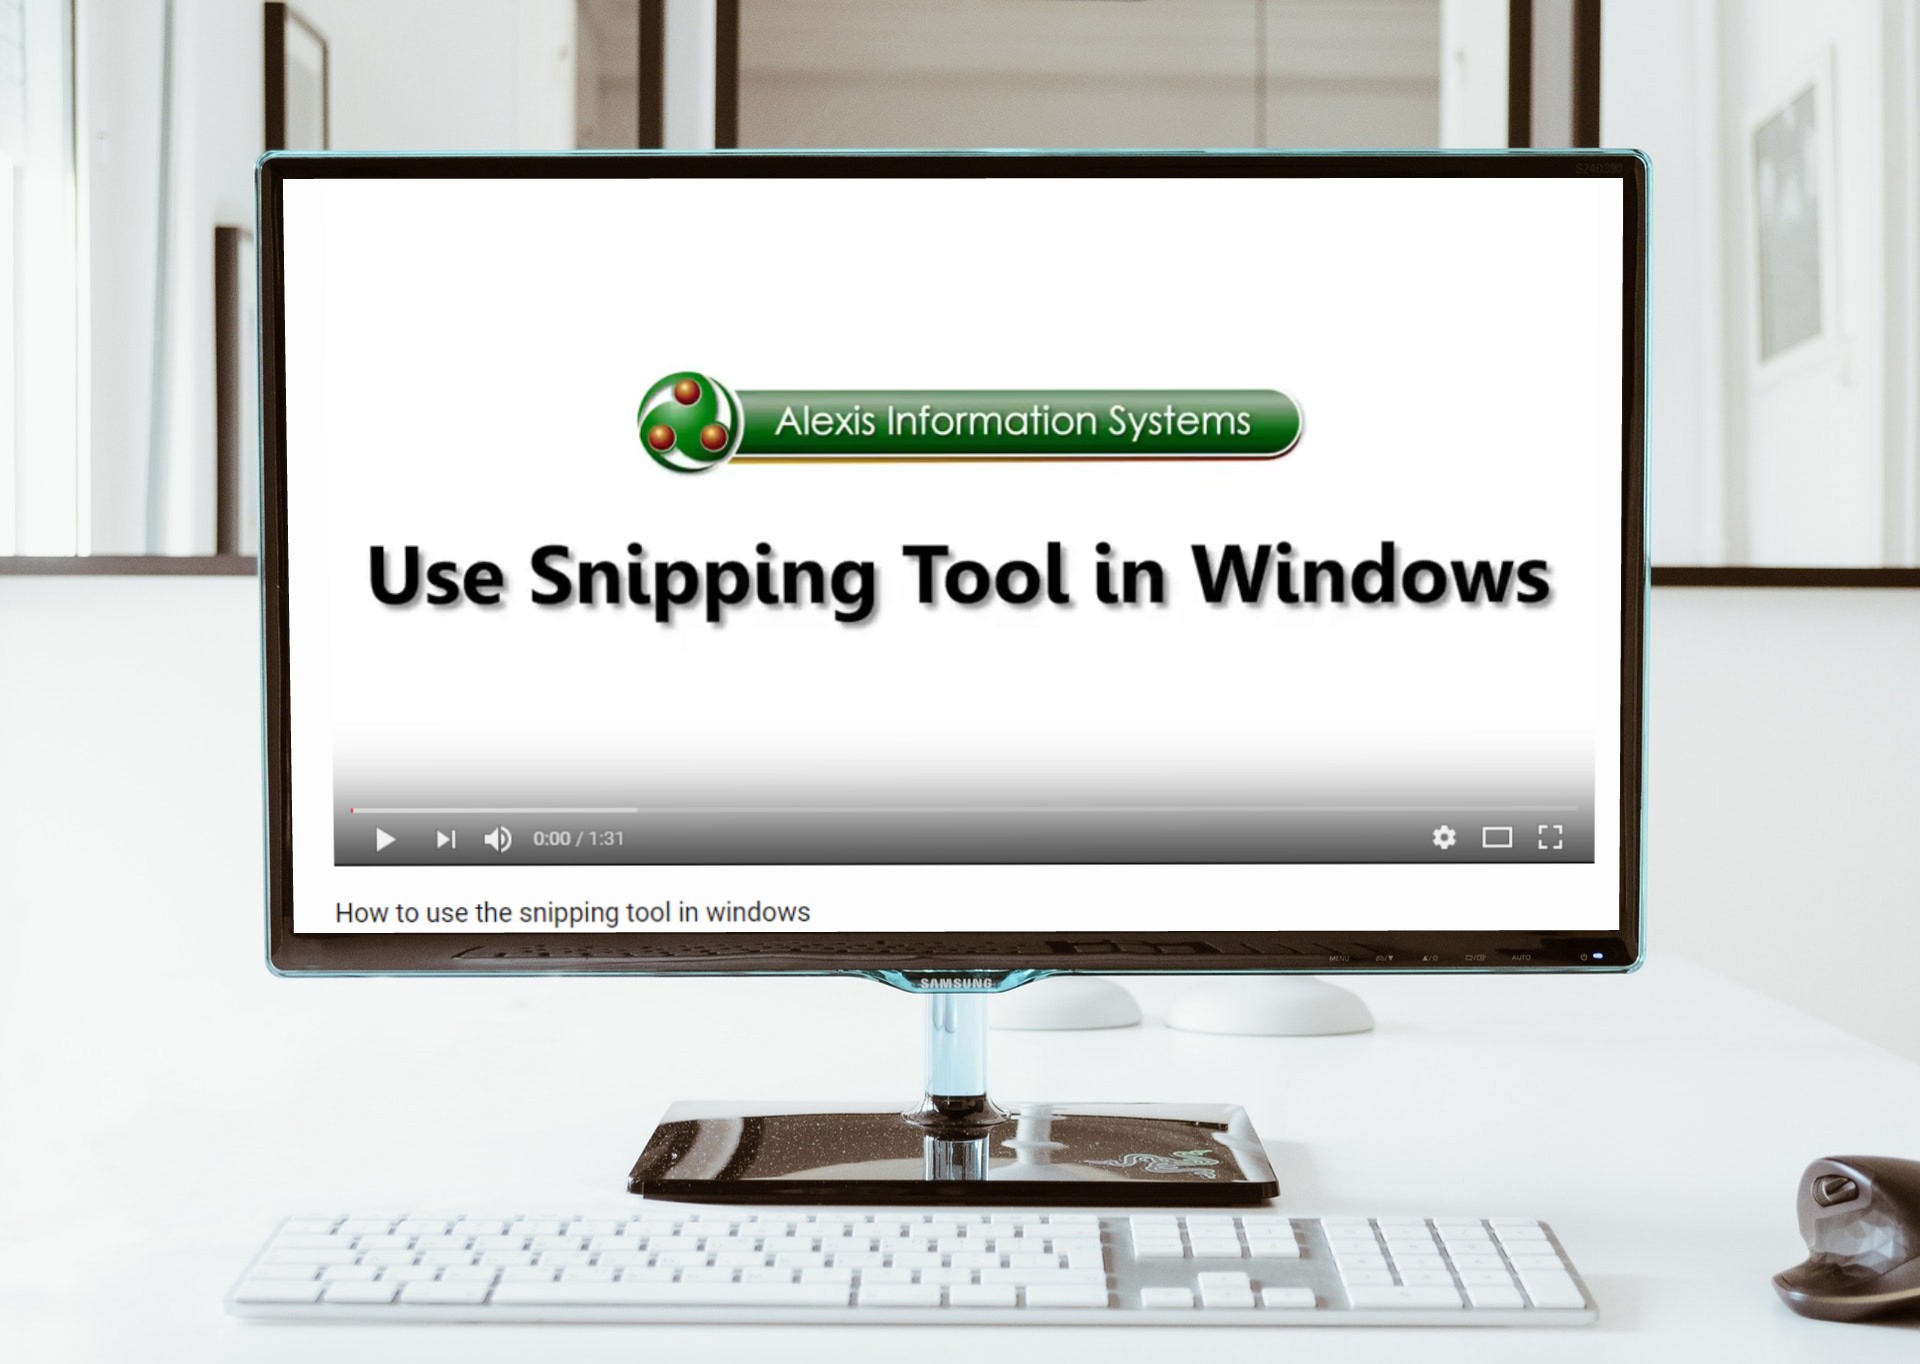 snipping tool window 7 free download